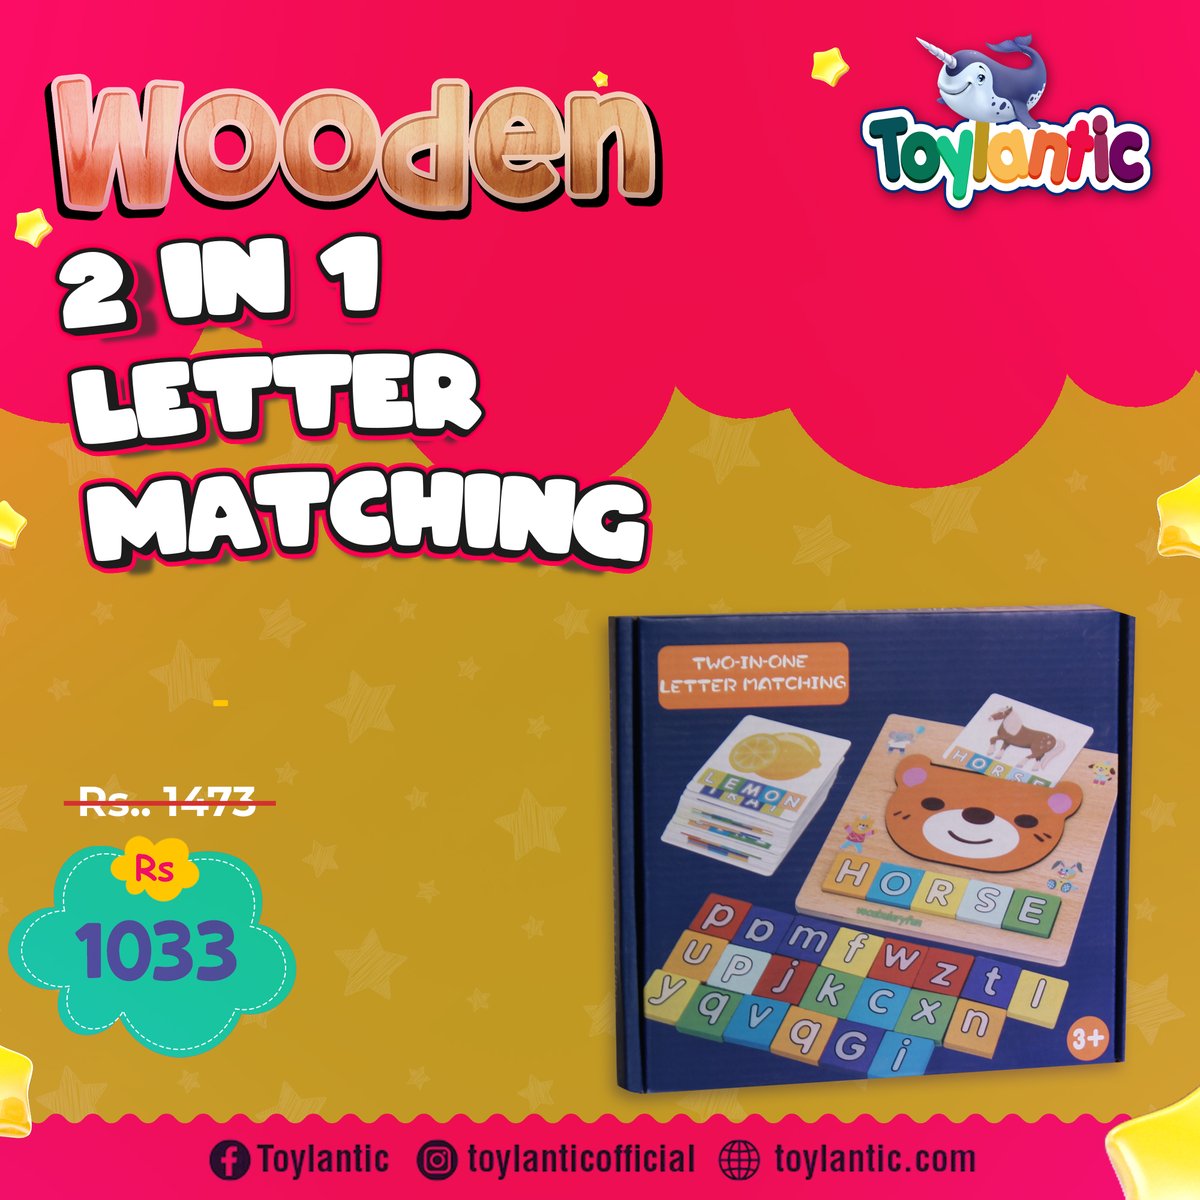 Make sure that your child match the letters correctly..!
Click the link below to explore more educational toys:
toylantic.com/.../toys-by-ca…...
For Details & Queries
0334 0008697
#woodenshapes #letter #matching #educationaltoys #kids #learningtoys #childgrowth #toys #toylantic